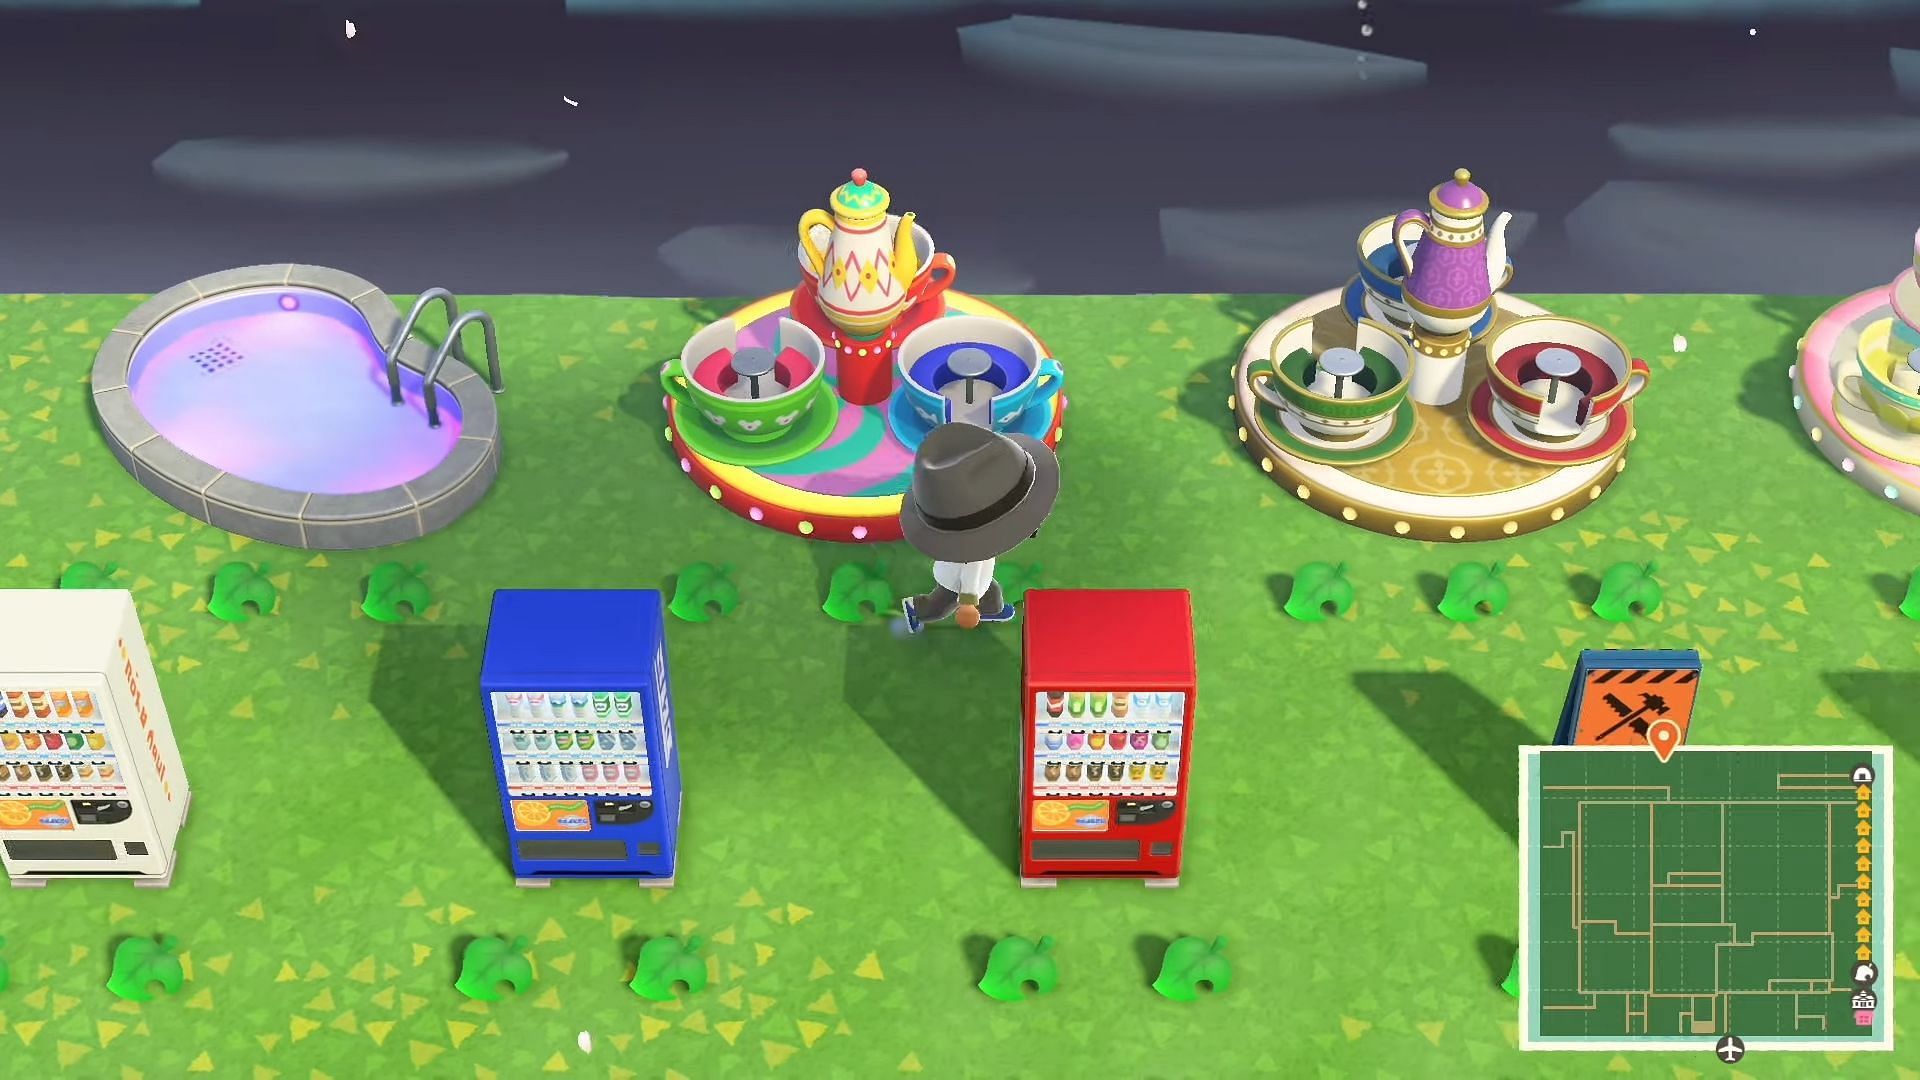 How to reach a Treasure Island in Animal Crossing New Horizons